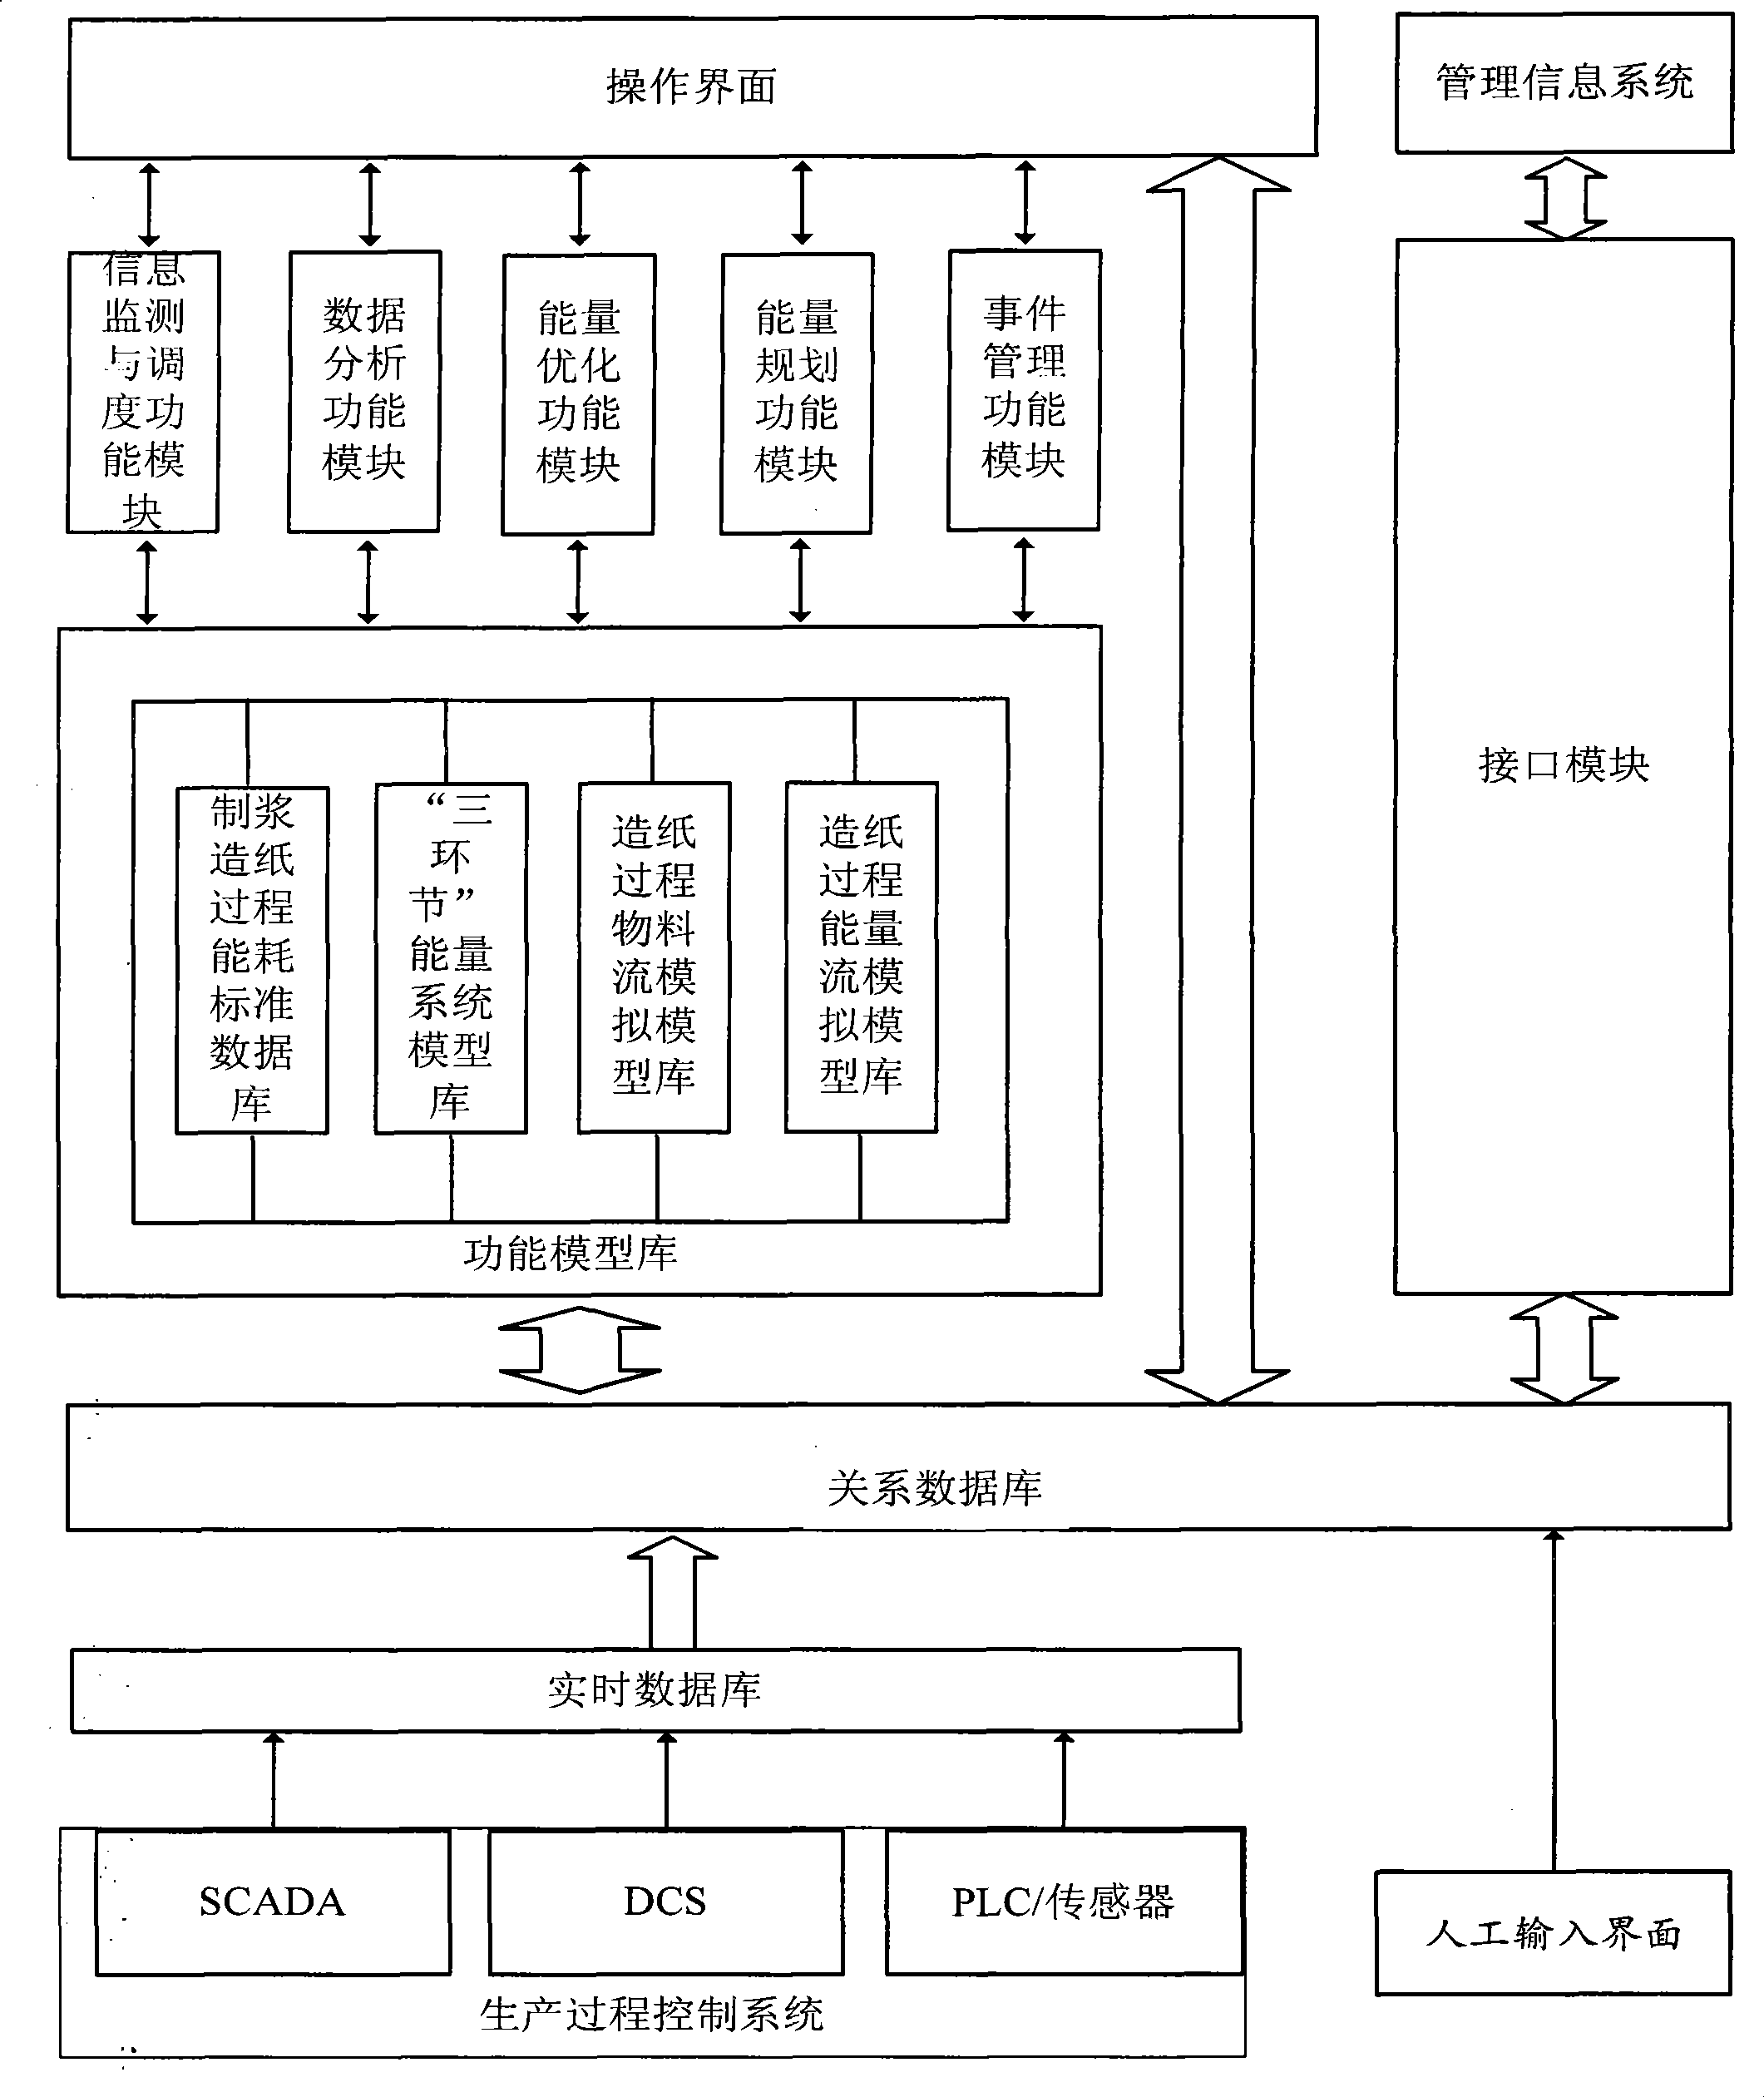 Synthesis optimizing and scheduling system of energy system